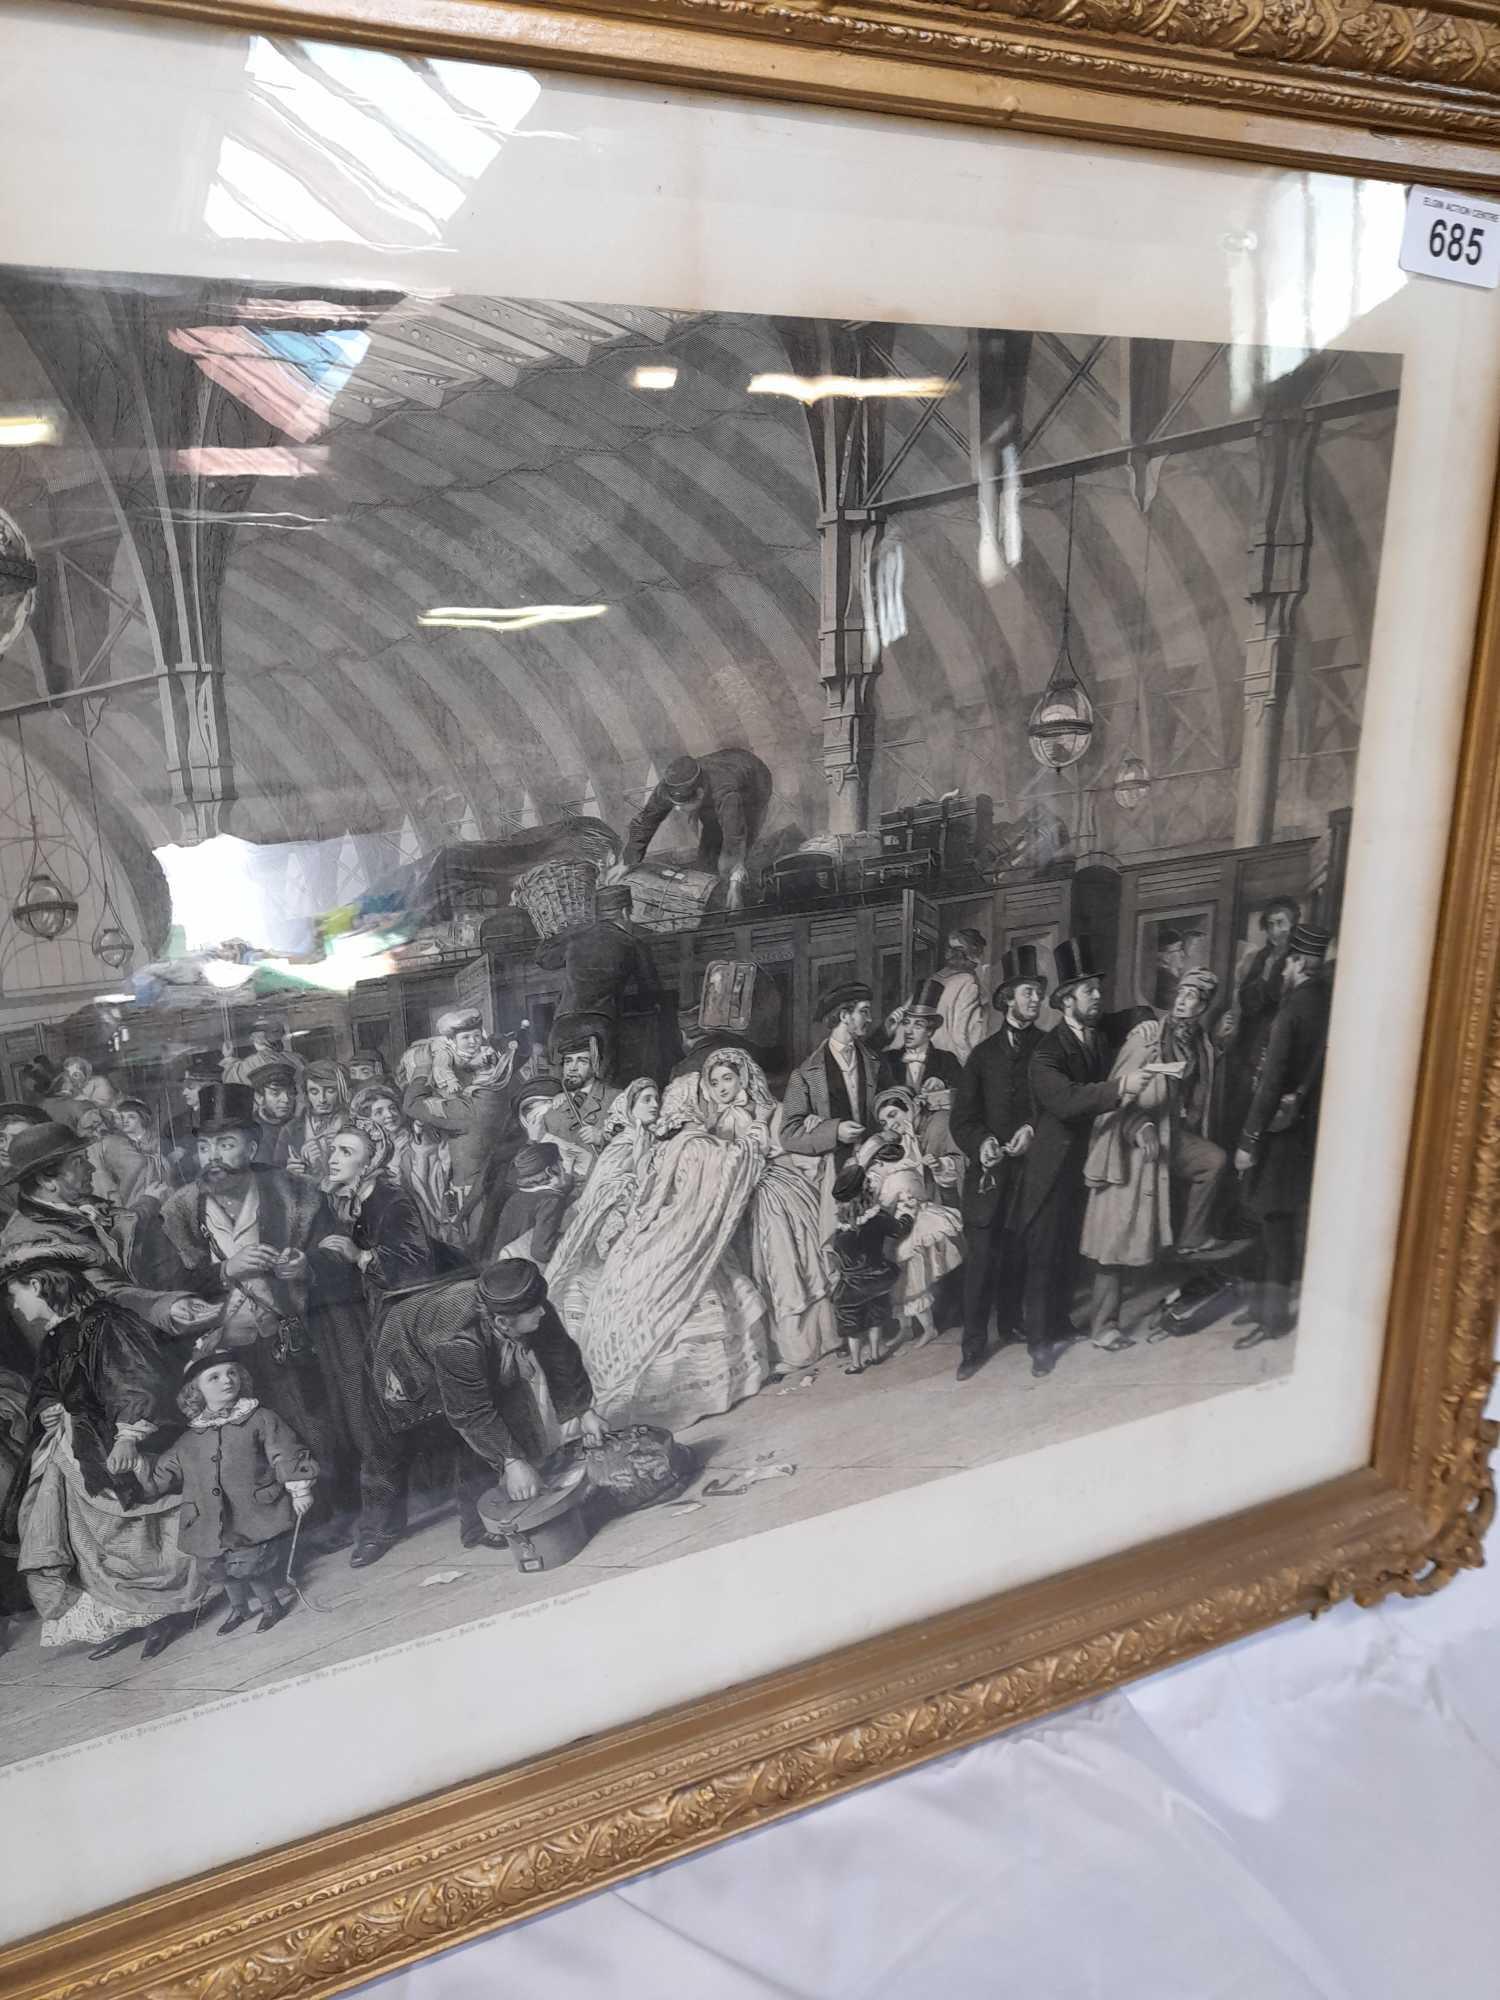 LARGE PRINT- THE RAILWAY STATION - Image 17 of 24